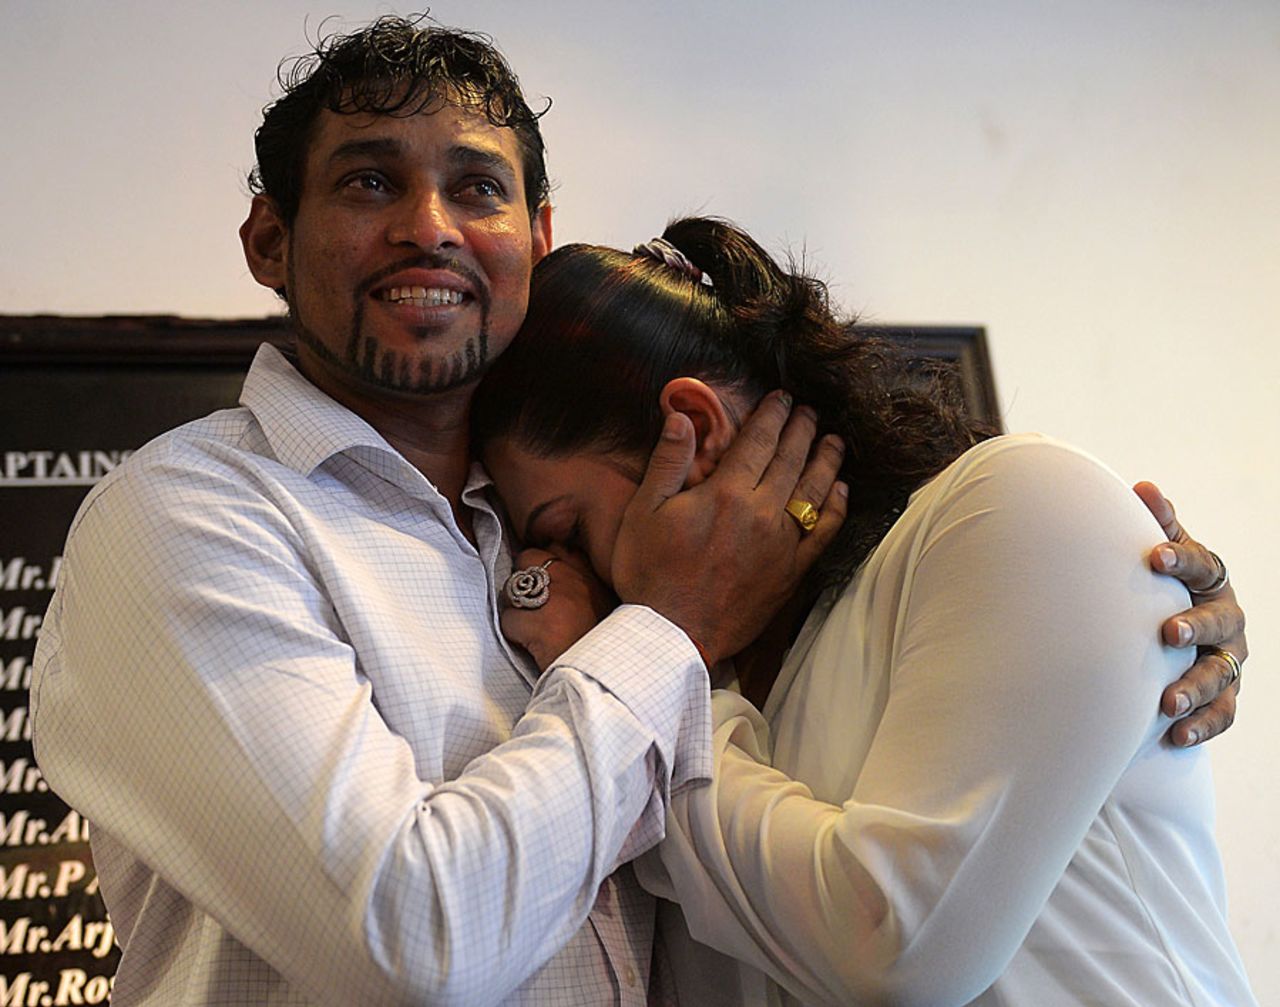 Tillakaratne Dilshan consoles his wife after she broke down during his Test retirement announcement, Colombo, October 10, 2013